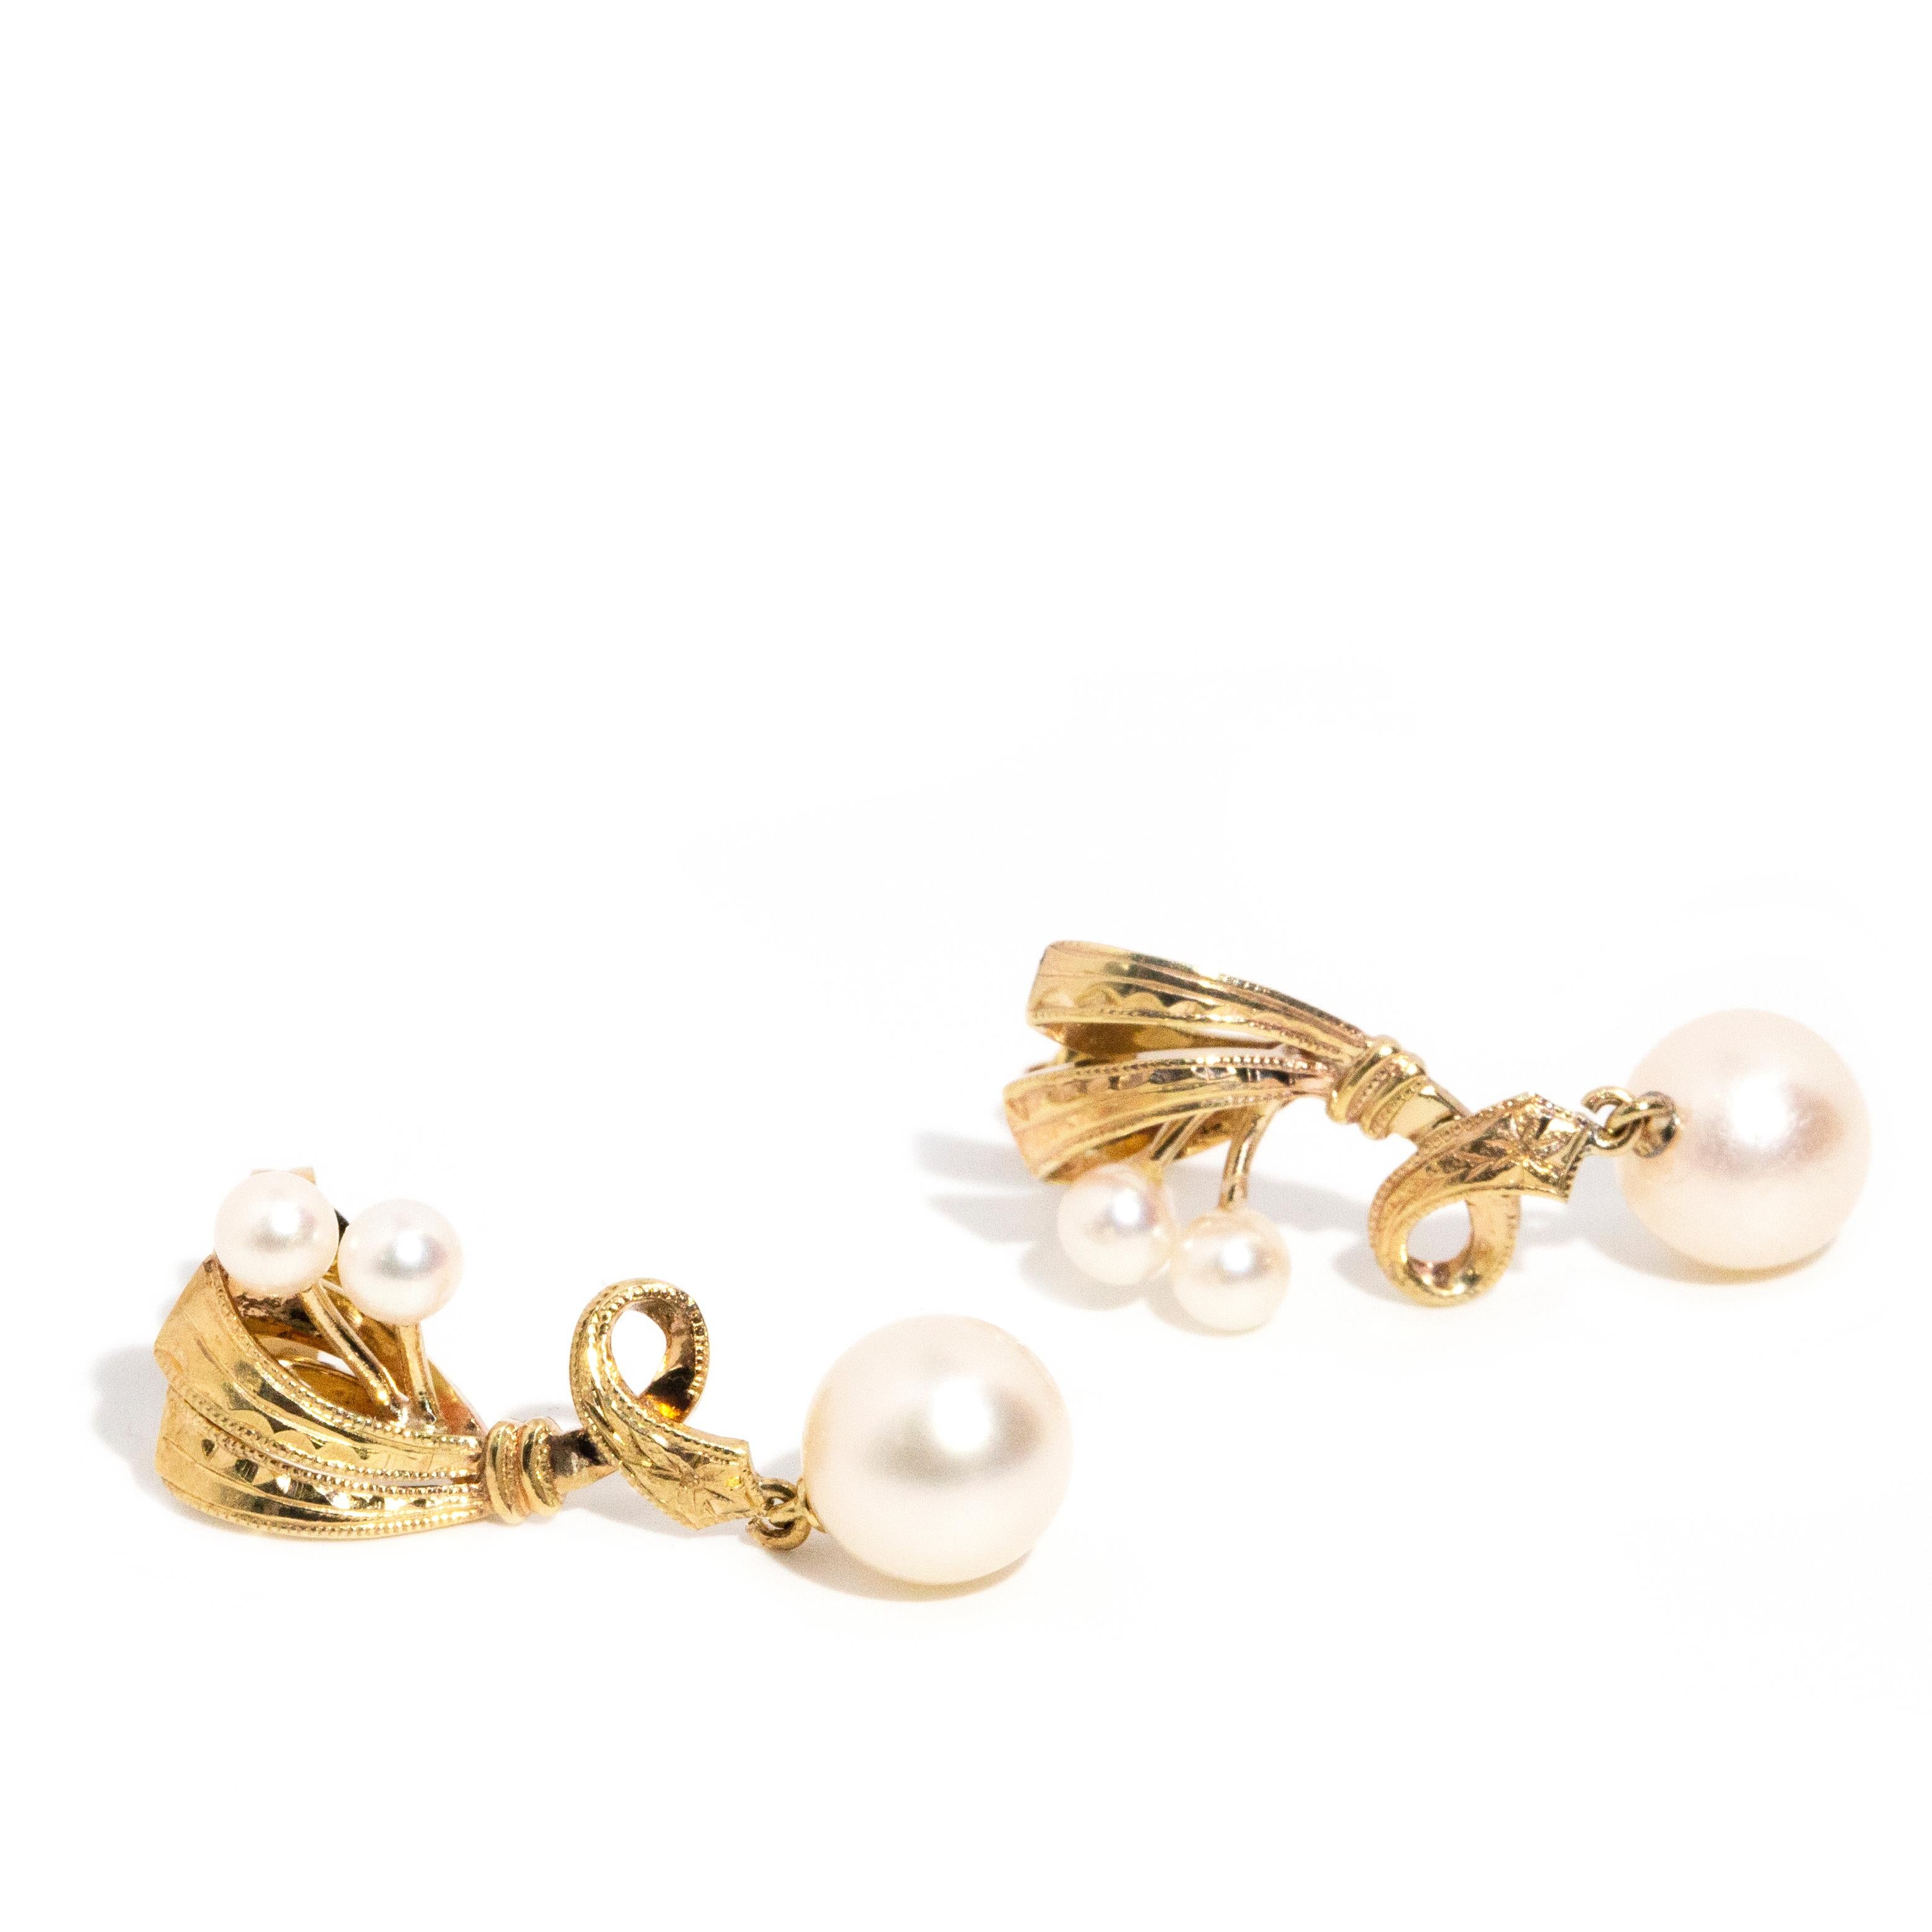 Round Cut Vintage Circa 1950s Cultured Pearl Twisted Ribbon Drop Earrings in 9 Carat Gold